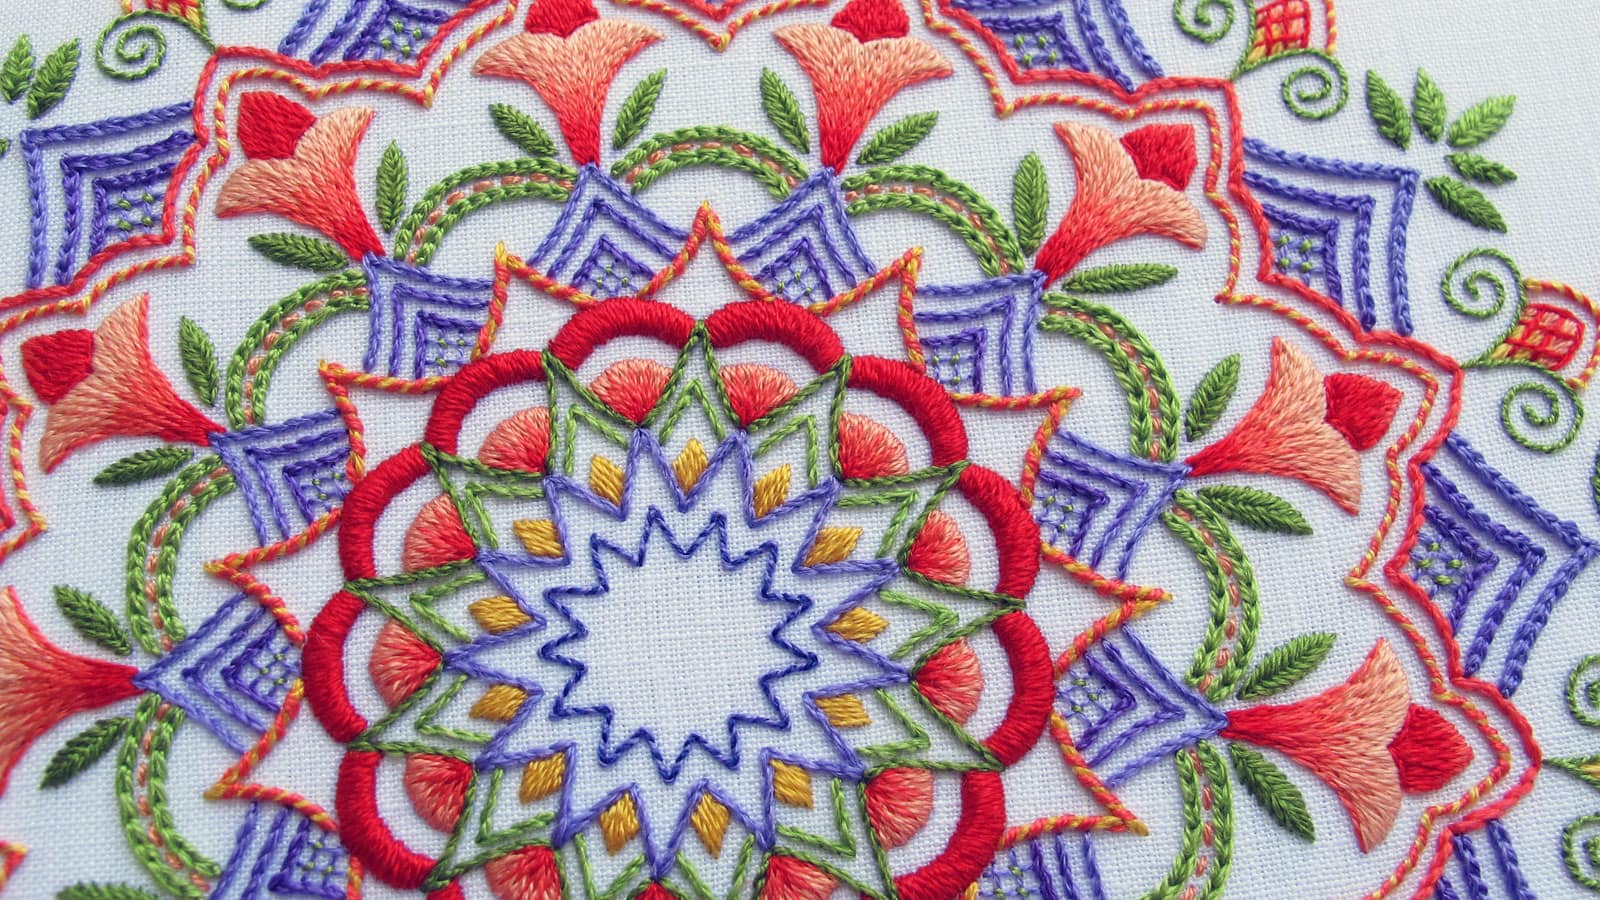 How To Design Embroidery Patterns Needlenthread Tips Tricks And Great Resources For Hand Embroidery